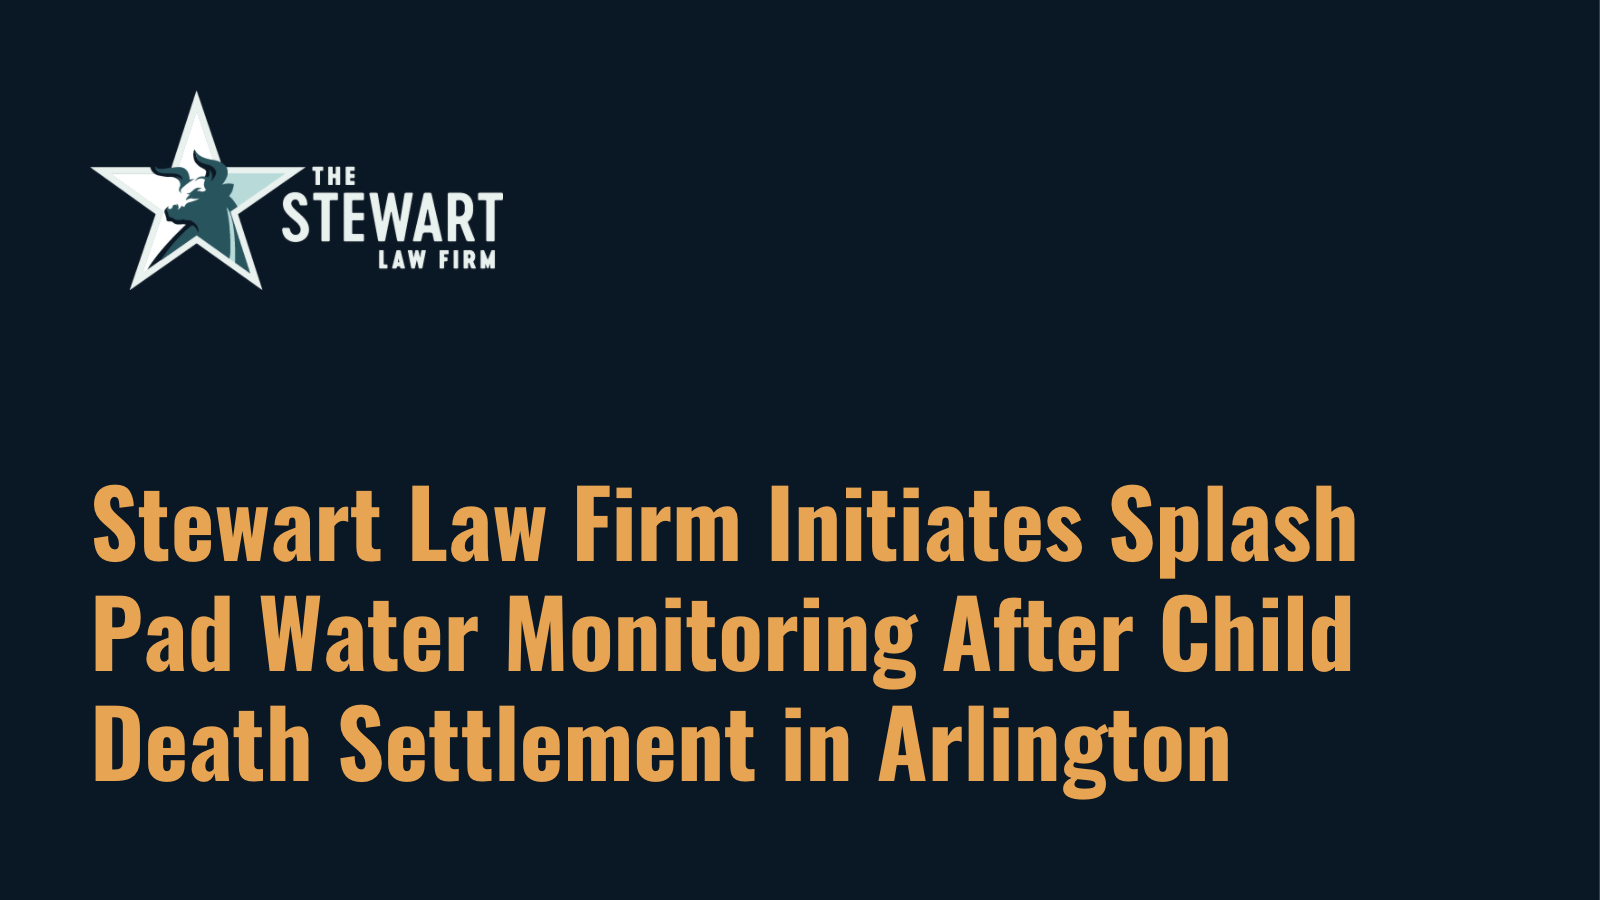 Stewart Law Firm Initiates Splash Pad Water Monitoring After Child Death Settlement in Arlington - the stewart law firm - austin texas personal injury lawyer